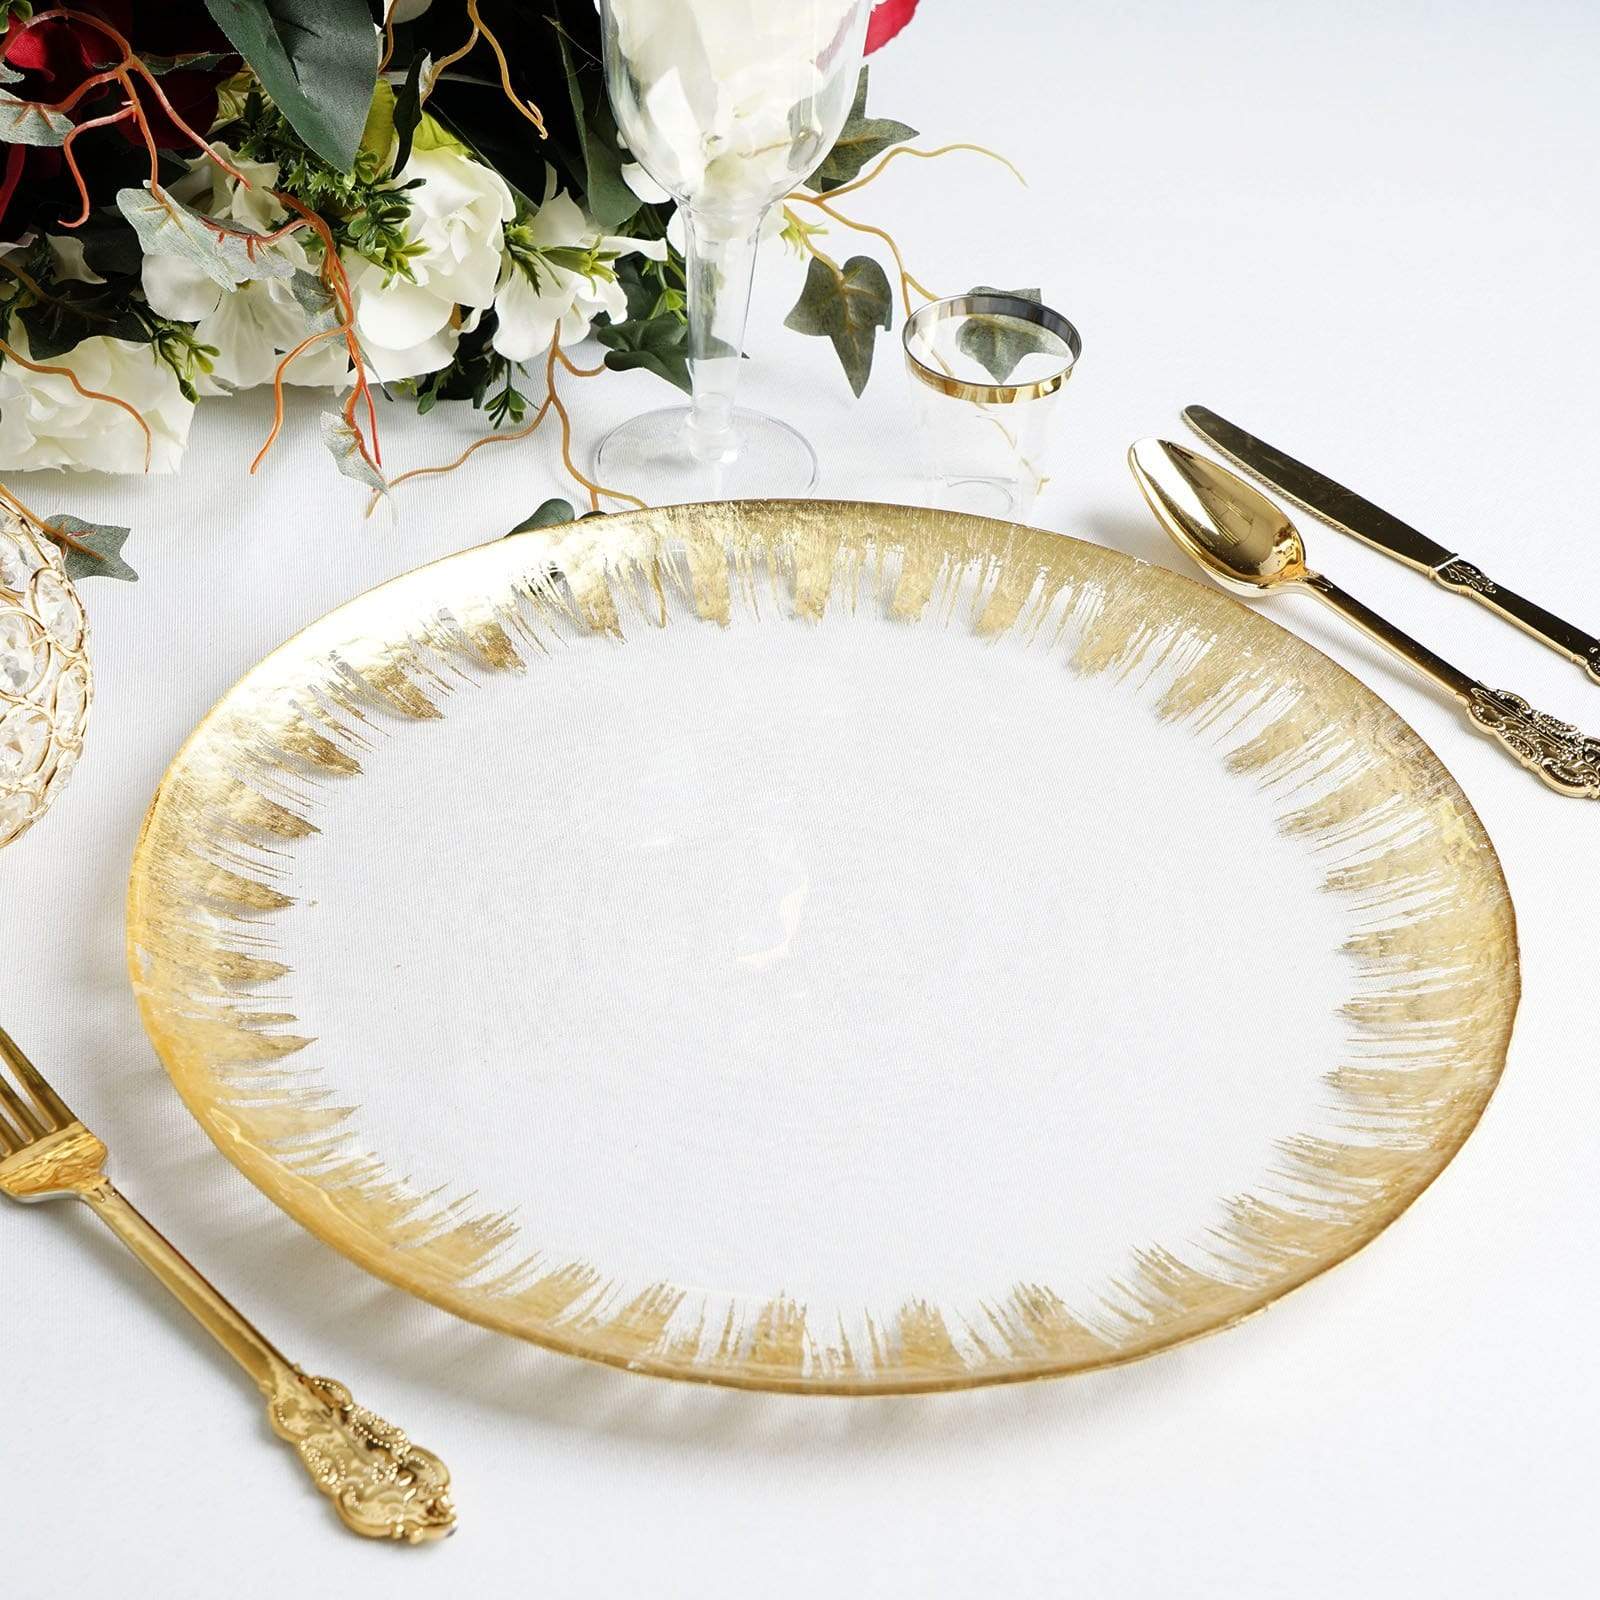 8 pcs 13 in Rimmed Glass Charger Plates